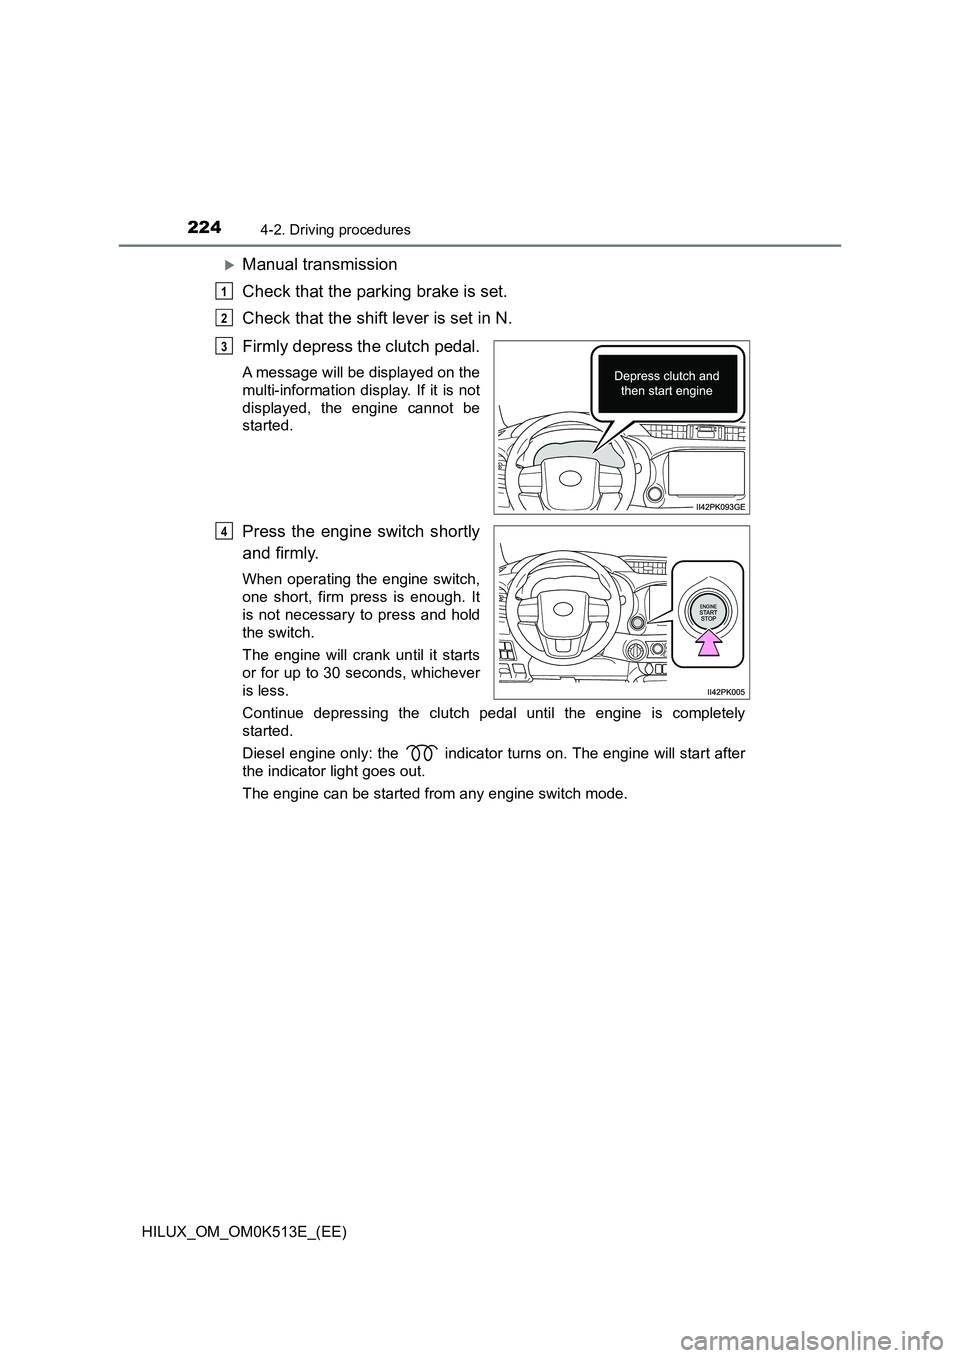 TOYOTA HILUX 2021  Owners Manual (in English) 2244-2. Driving procedures
HILUX_OM_OM0K513E_(EE)
Manual transmission 
Check that the parking brake is set. 
Check that the shift lever is set in N. 
Firmly depress the clutch pedal.
A message will